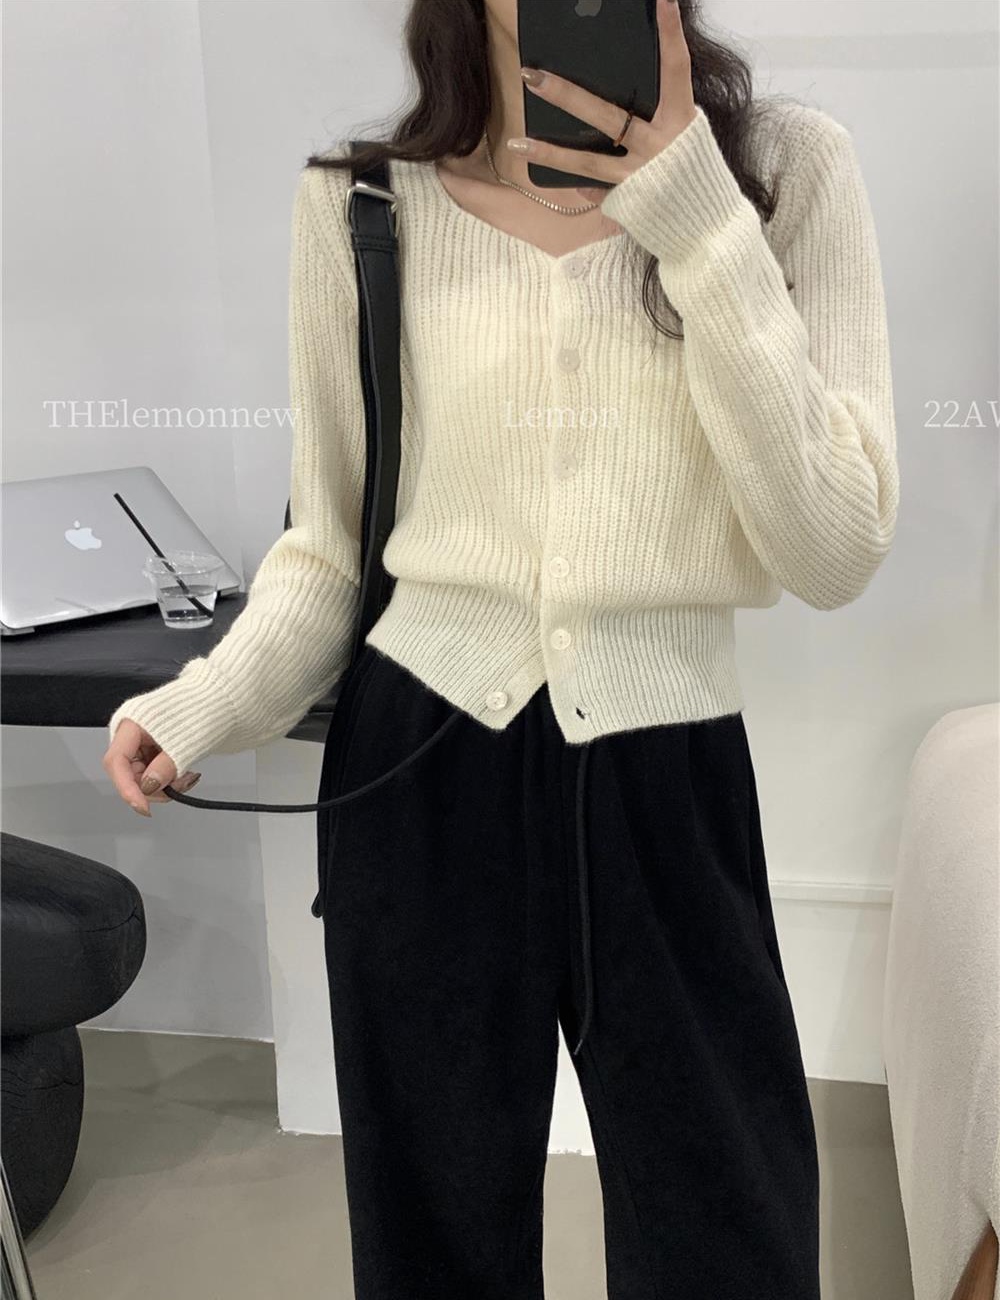 Pinched waist short cardigan knitted tops